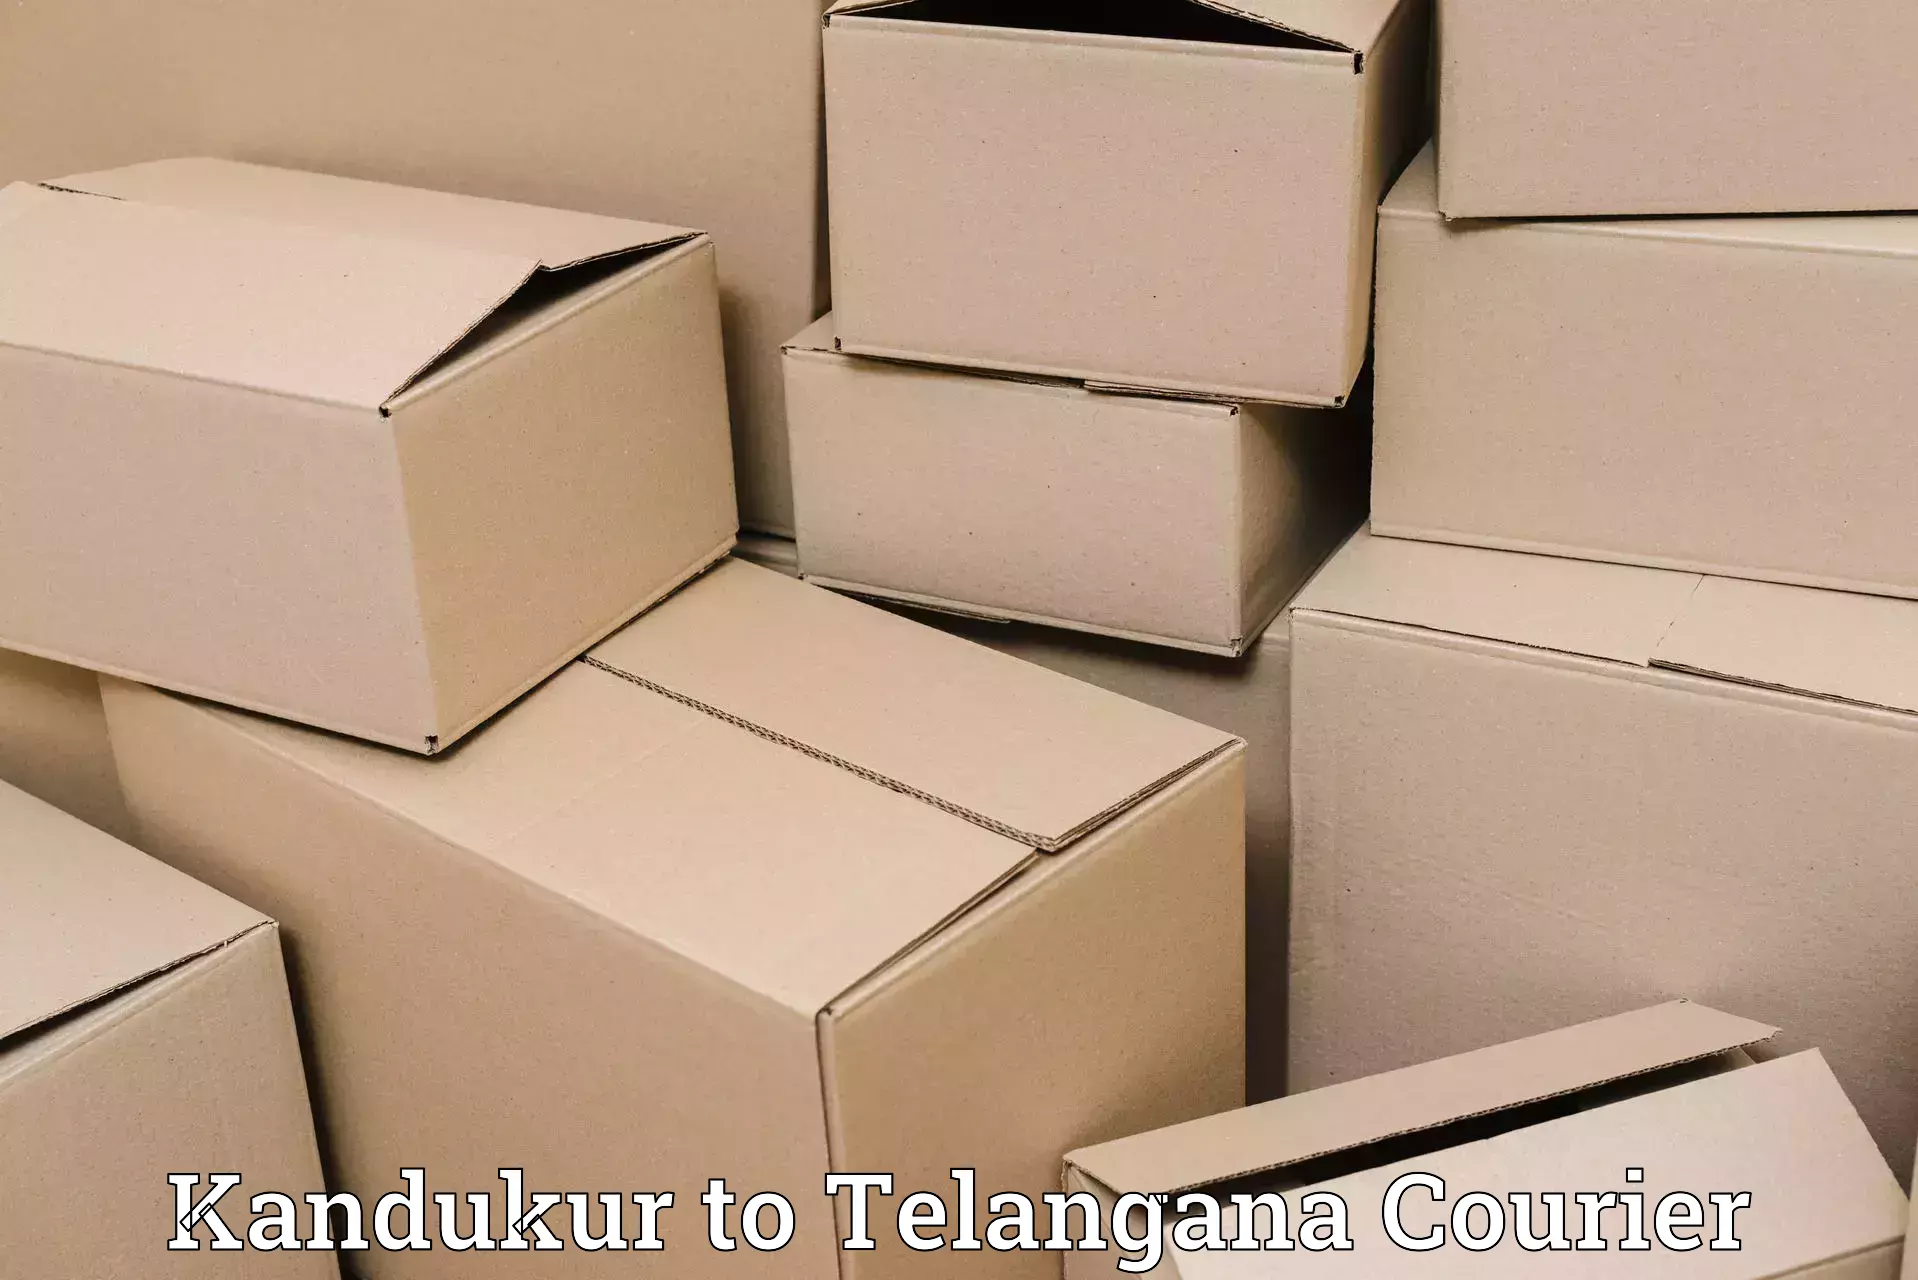 Parcel delivery automation Kandukur to Metpally